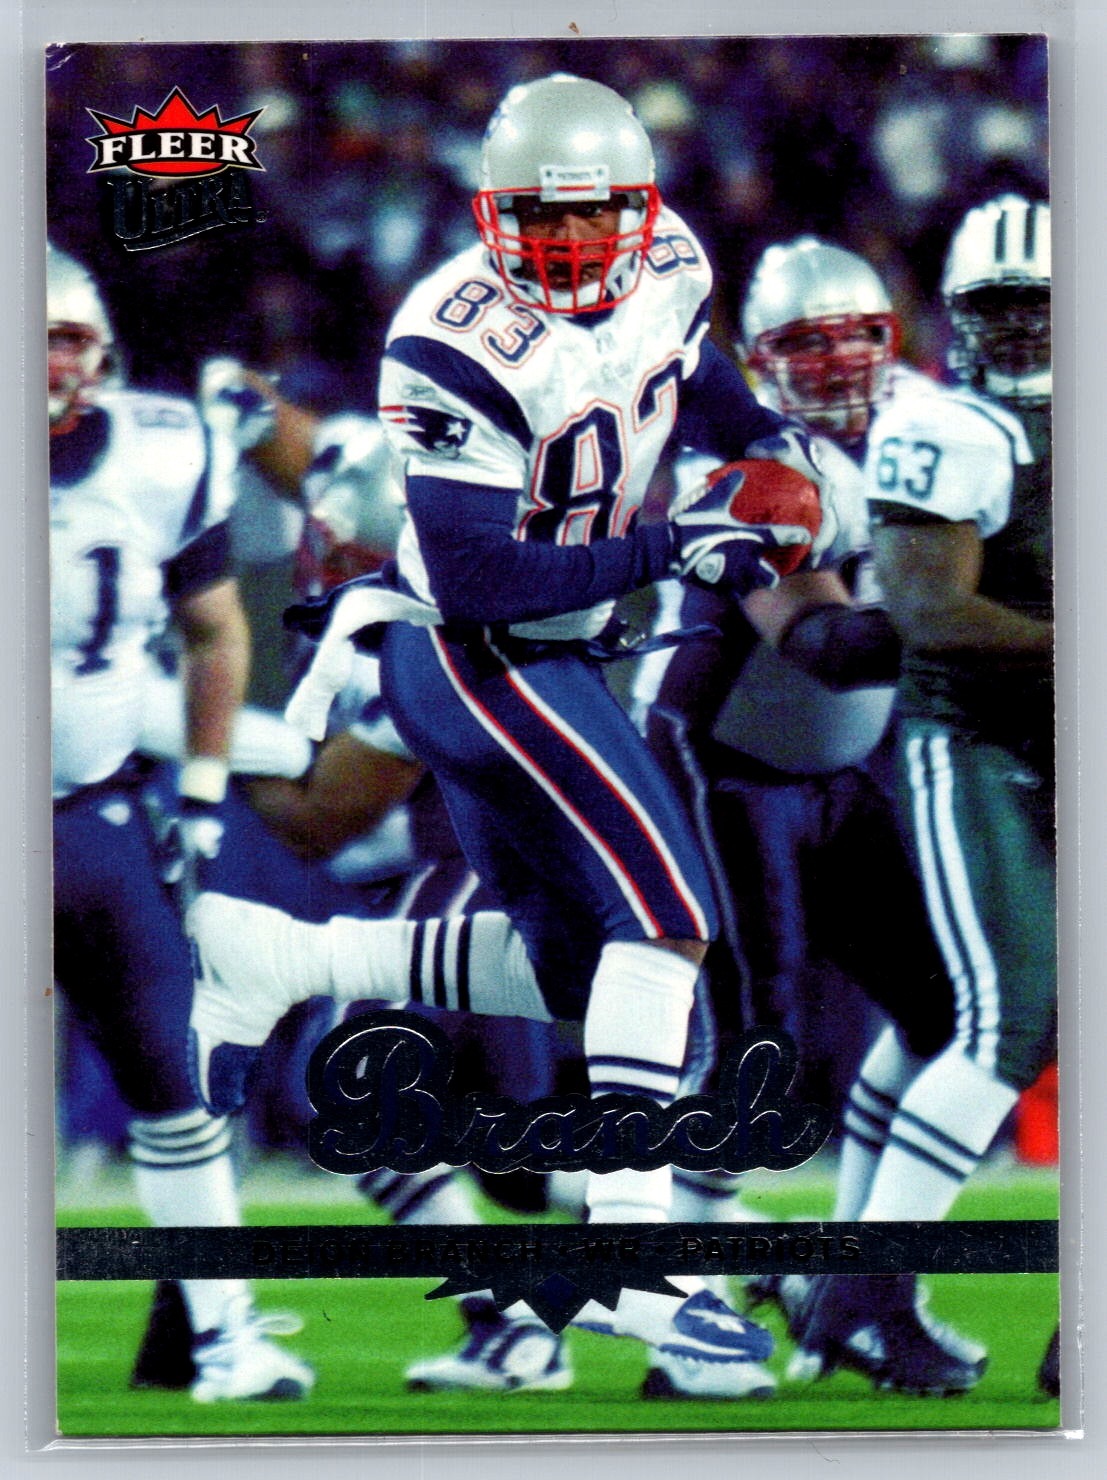 Primary image for 2006 Ultra #116 Deion Branch